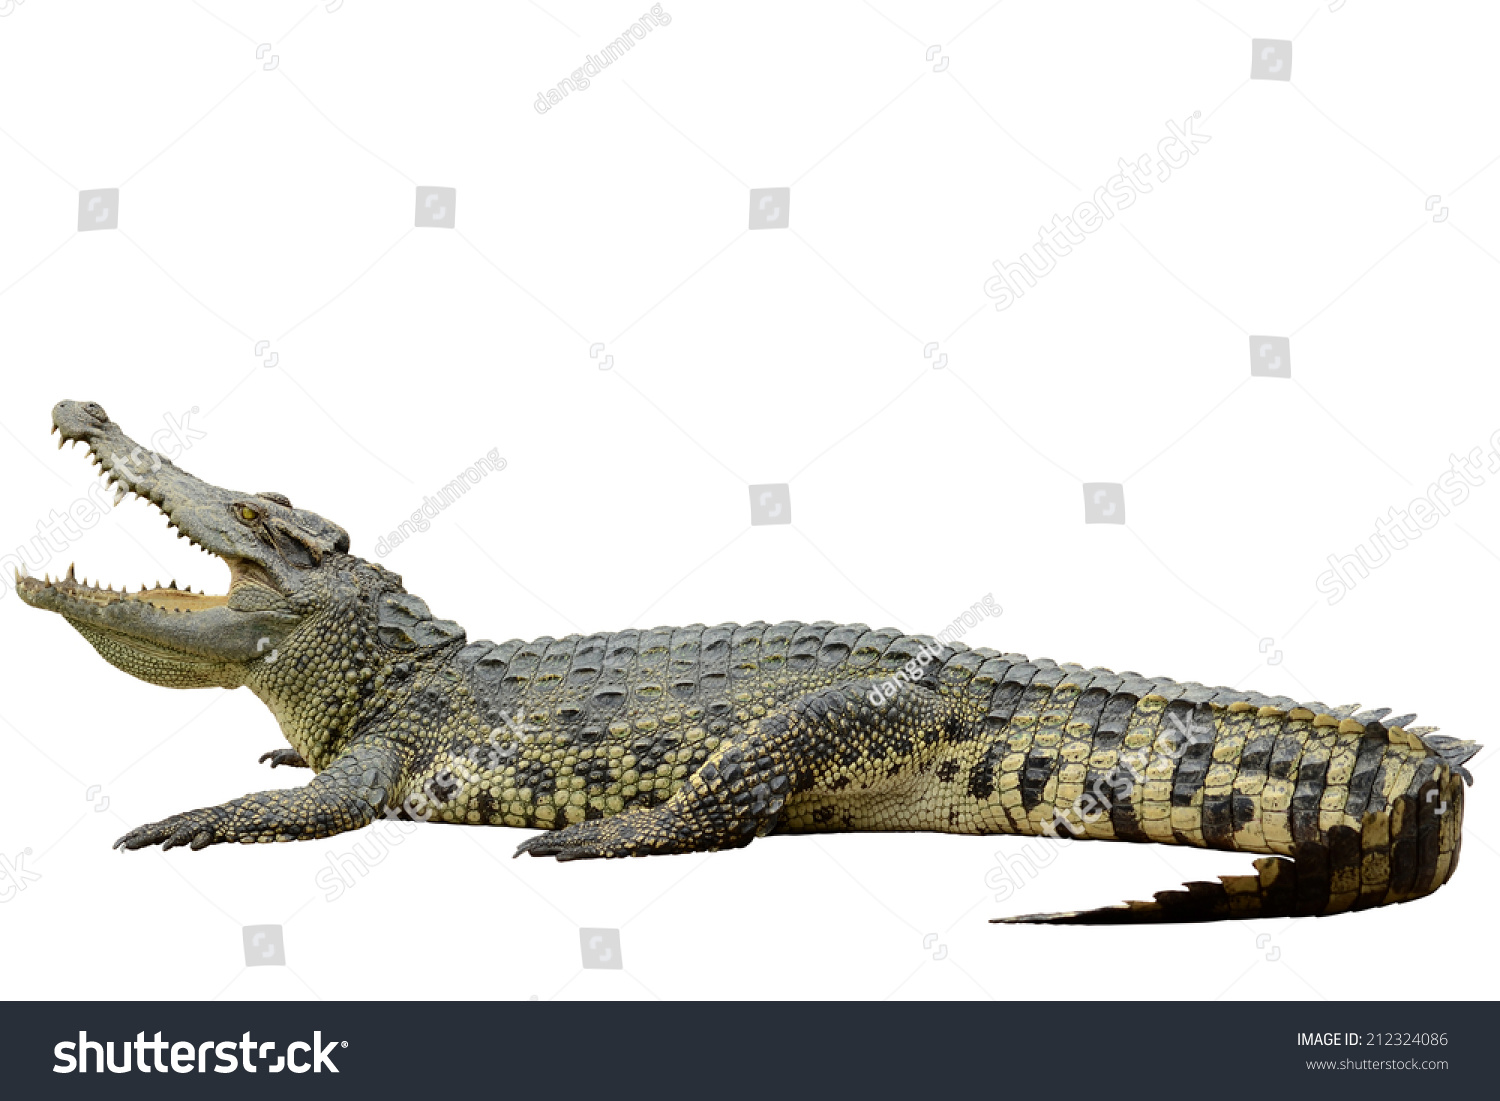 Crocodile isolated on white with clipping path   #212324086